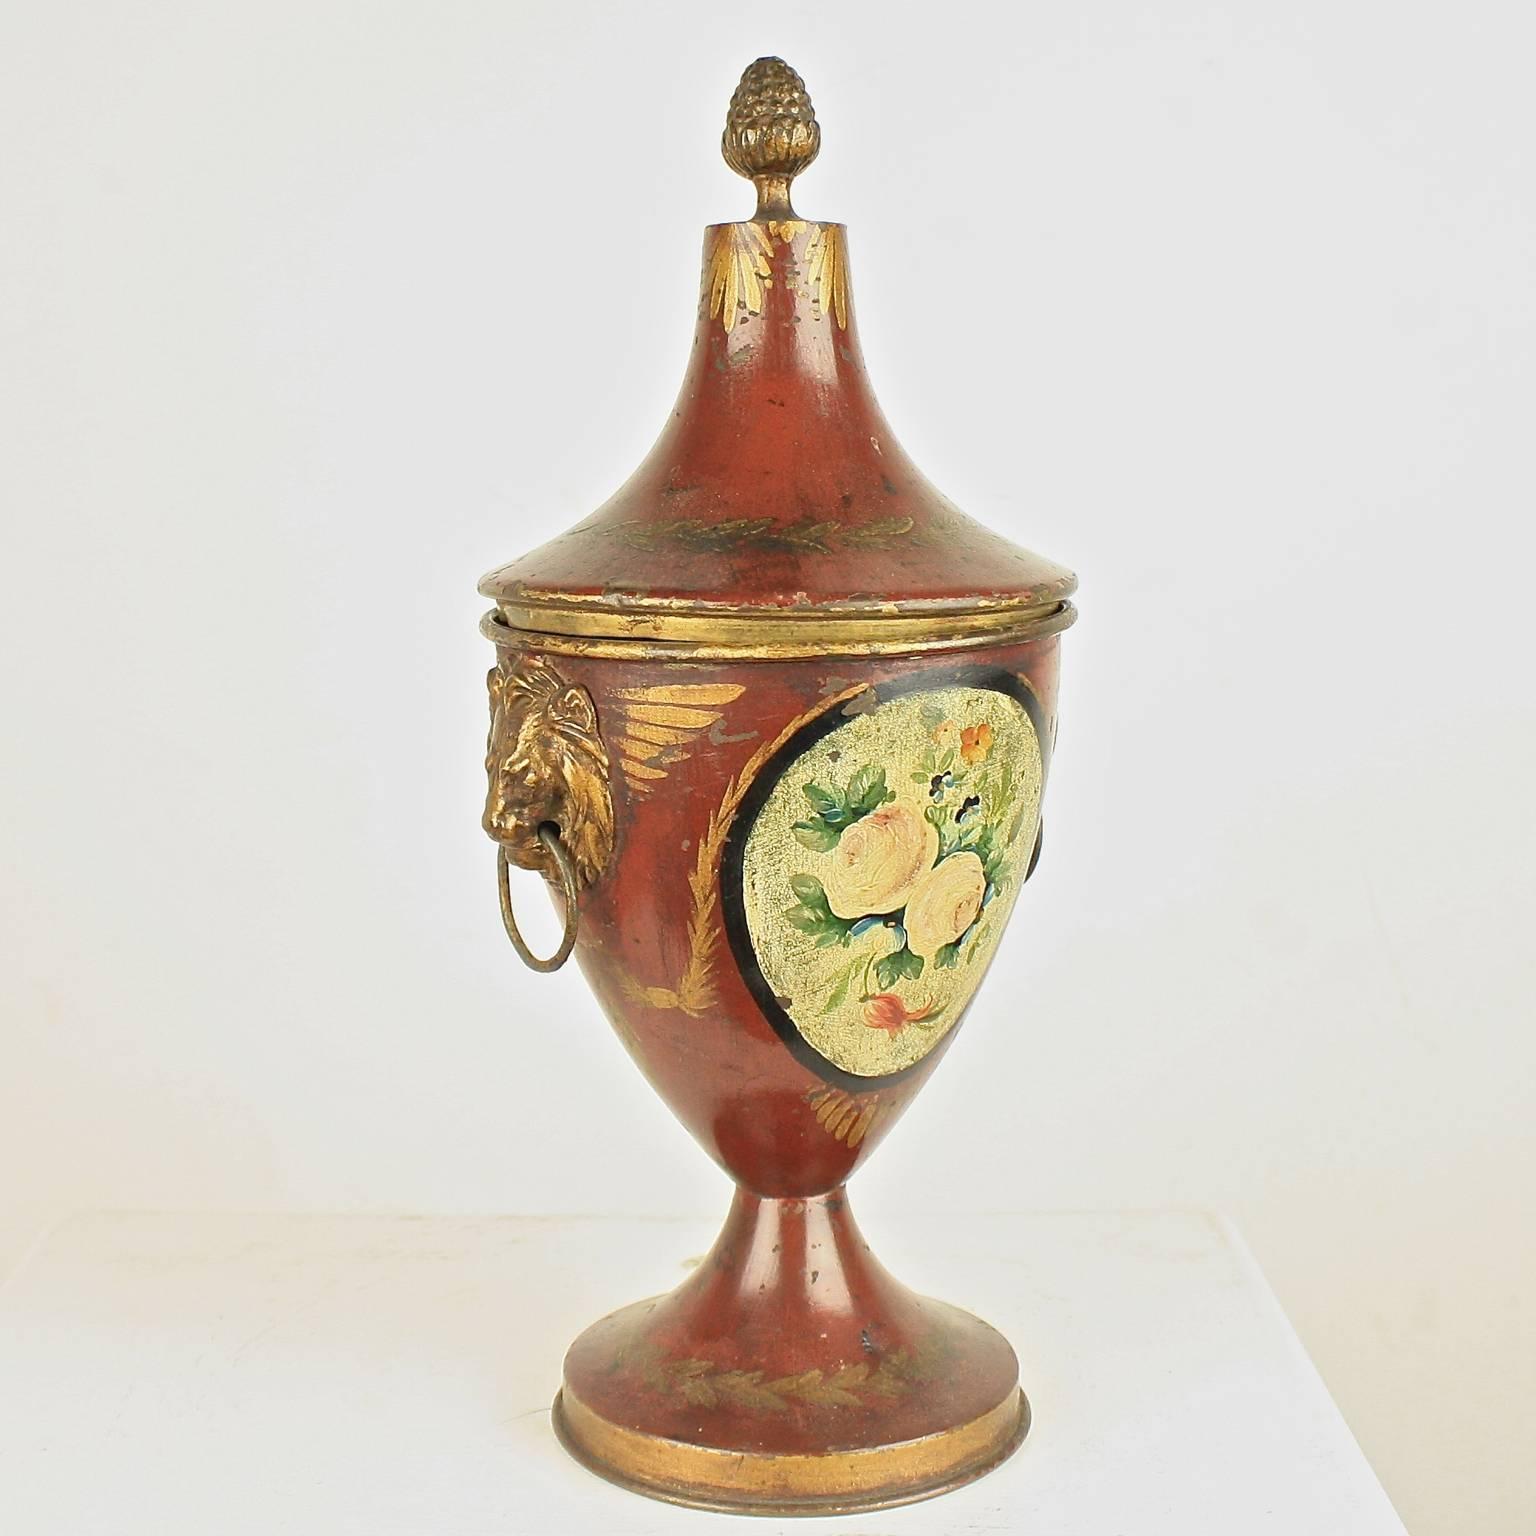 Early 19th century English Regency tole chestnut urn with a hand-painted floral decorative motif, a removable lid with acorn finials, original lions head side handles with rings, terminating on a circular molded edge plinths. The Venetian red body